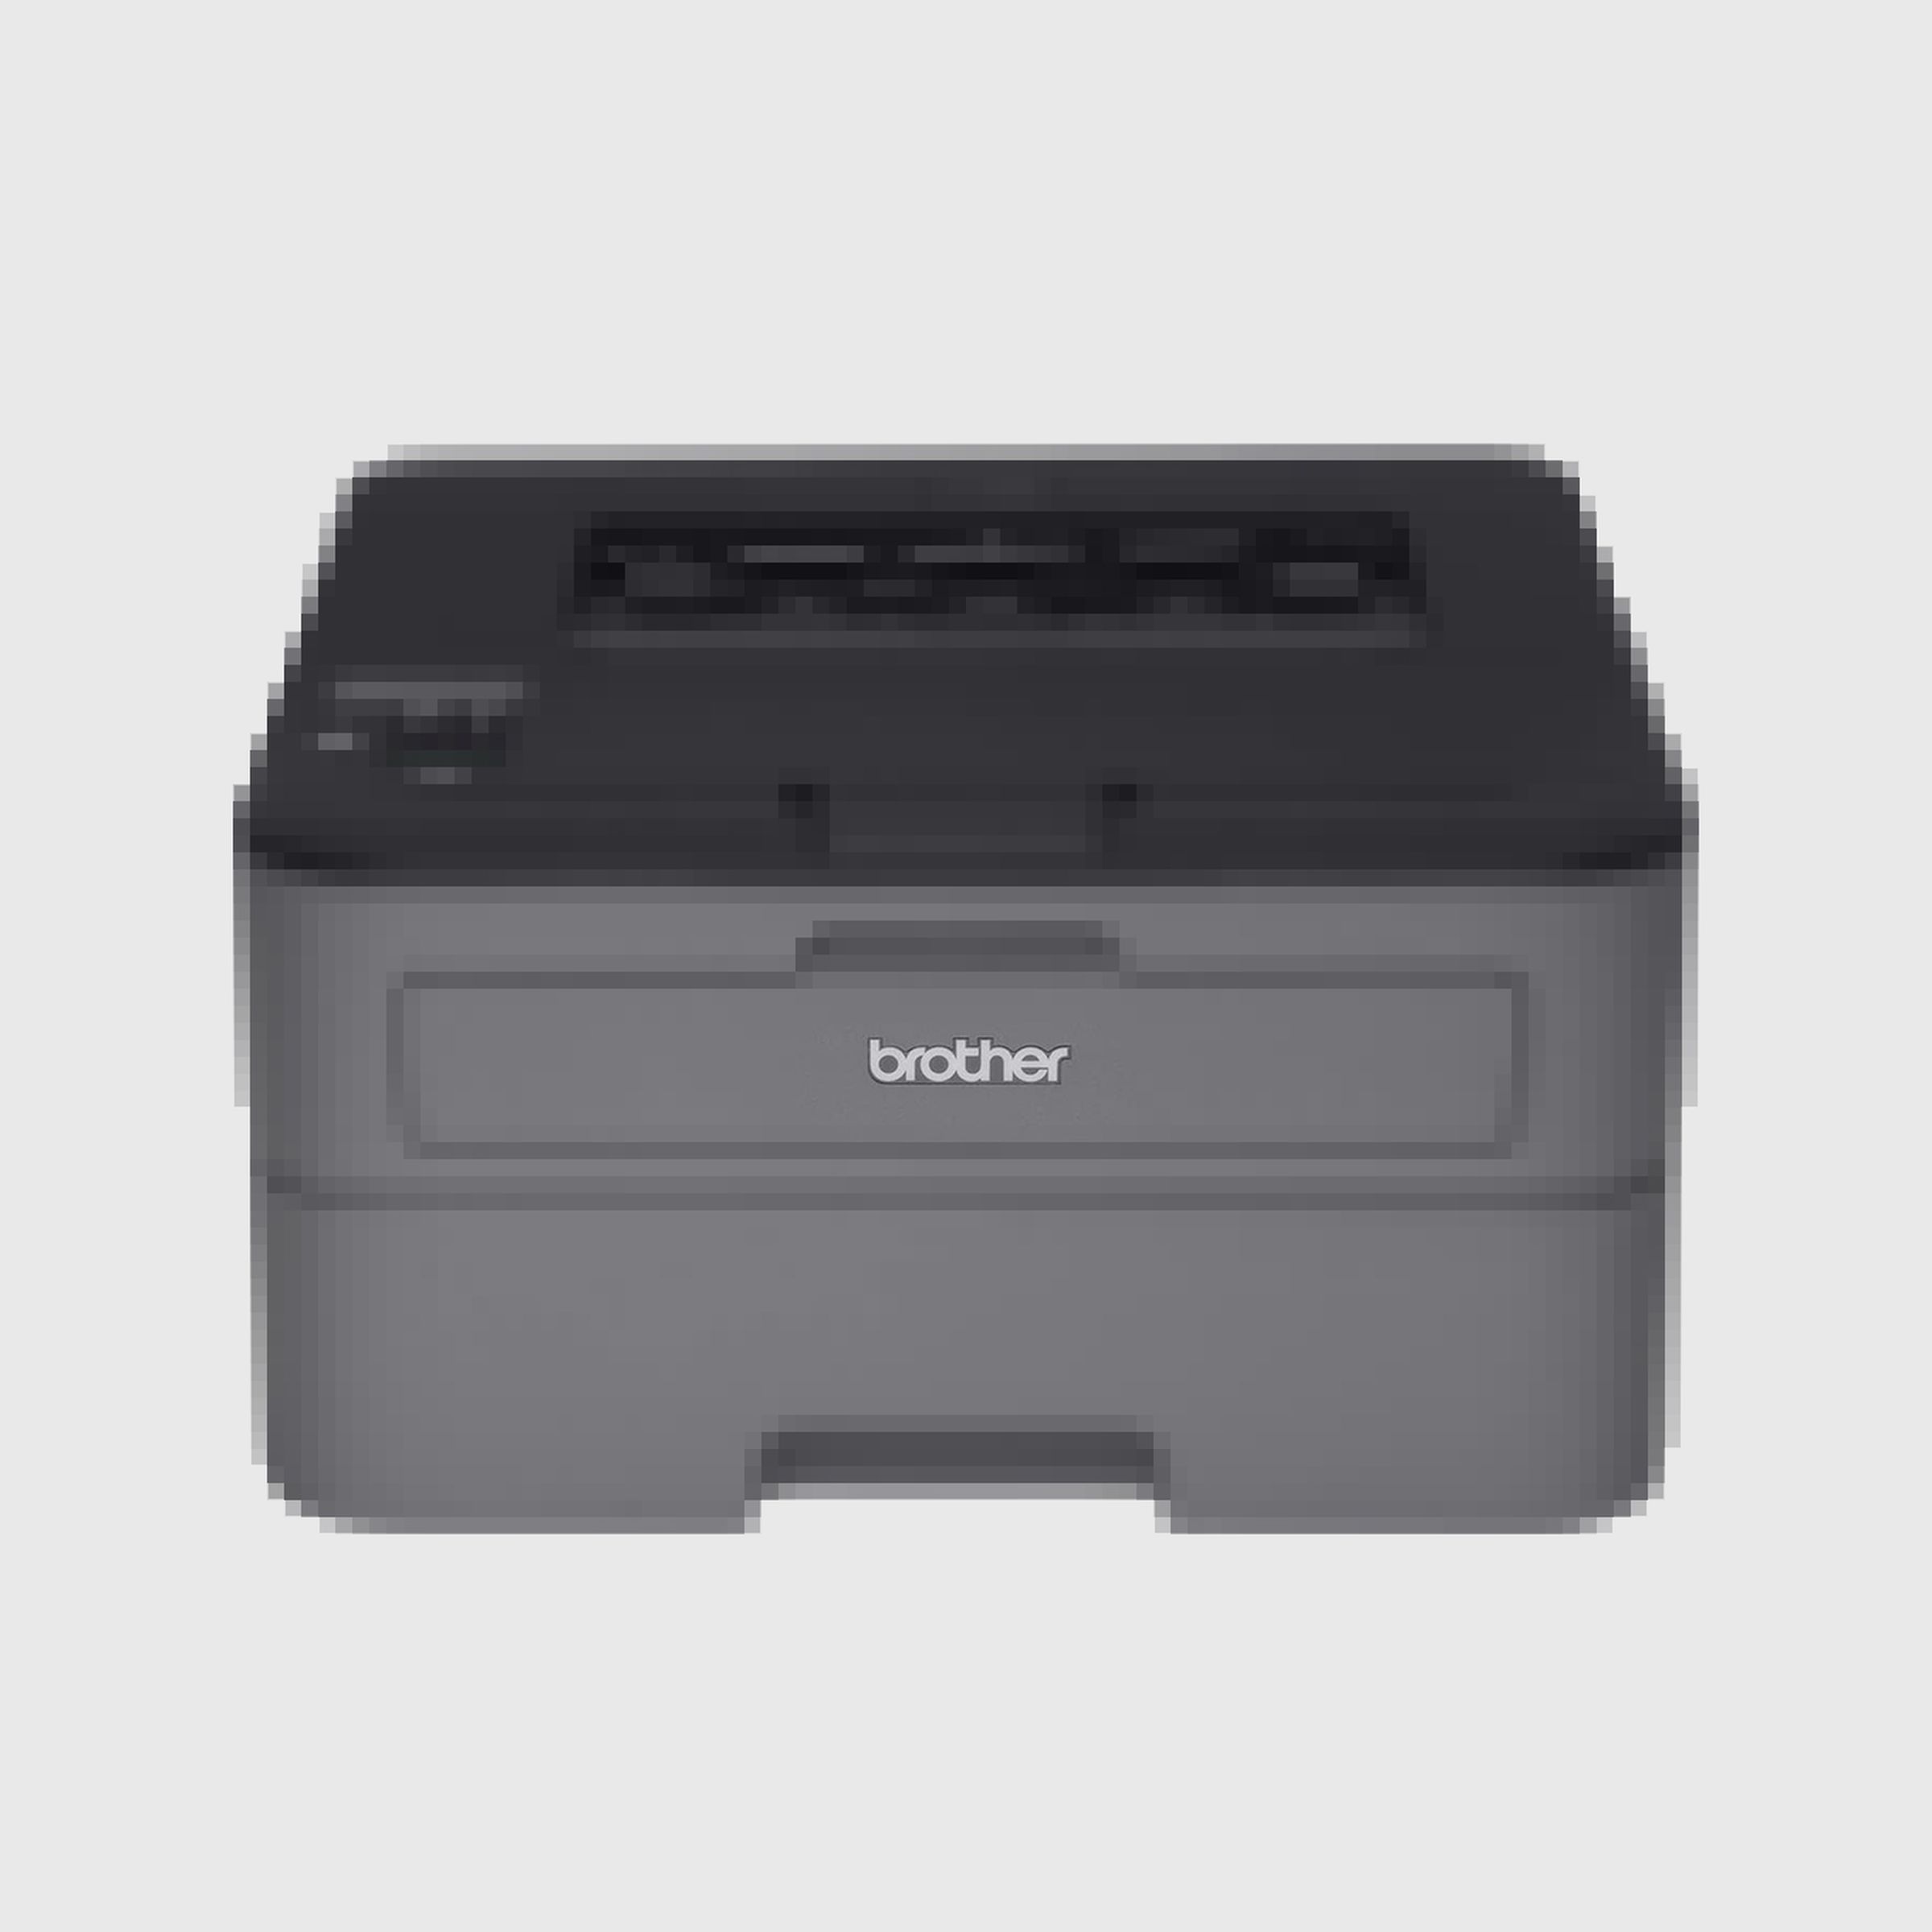 A blurry photo of a Brother laser printer.